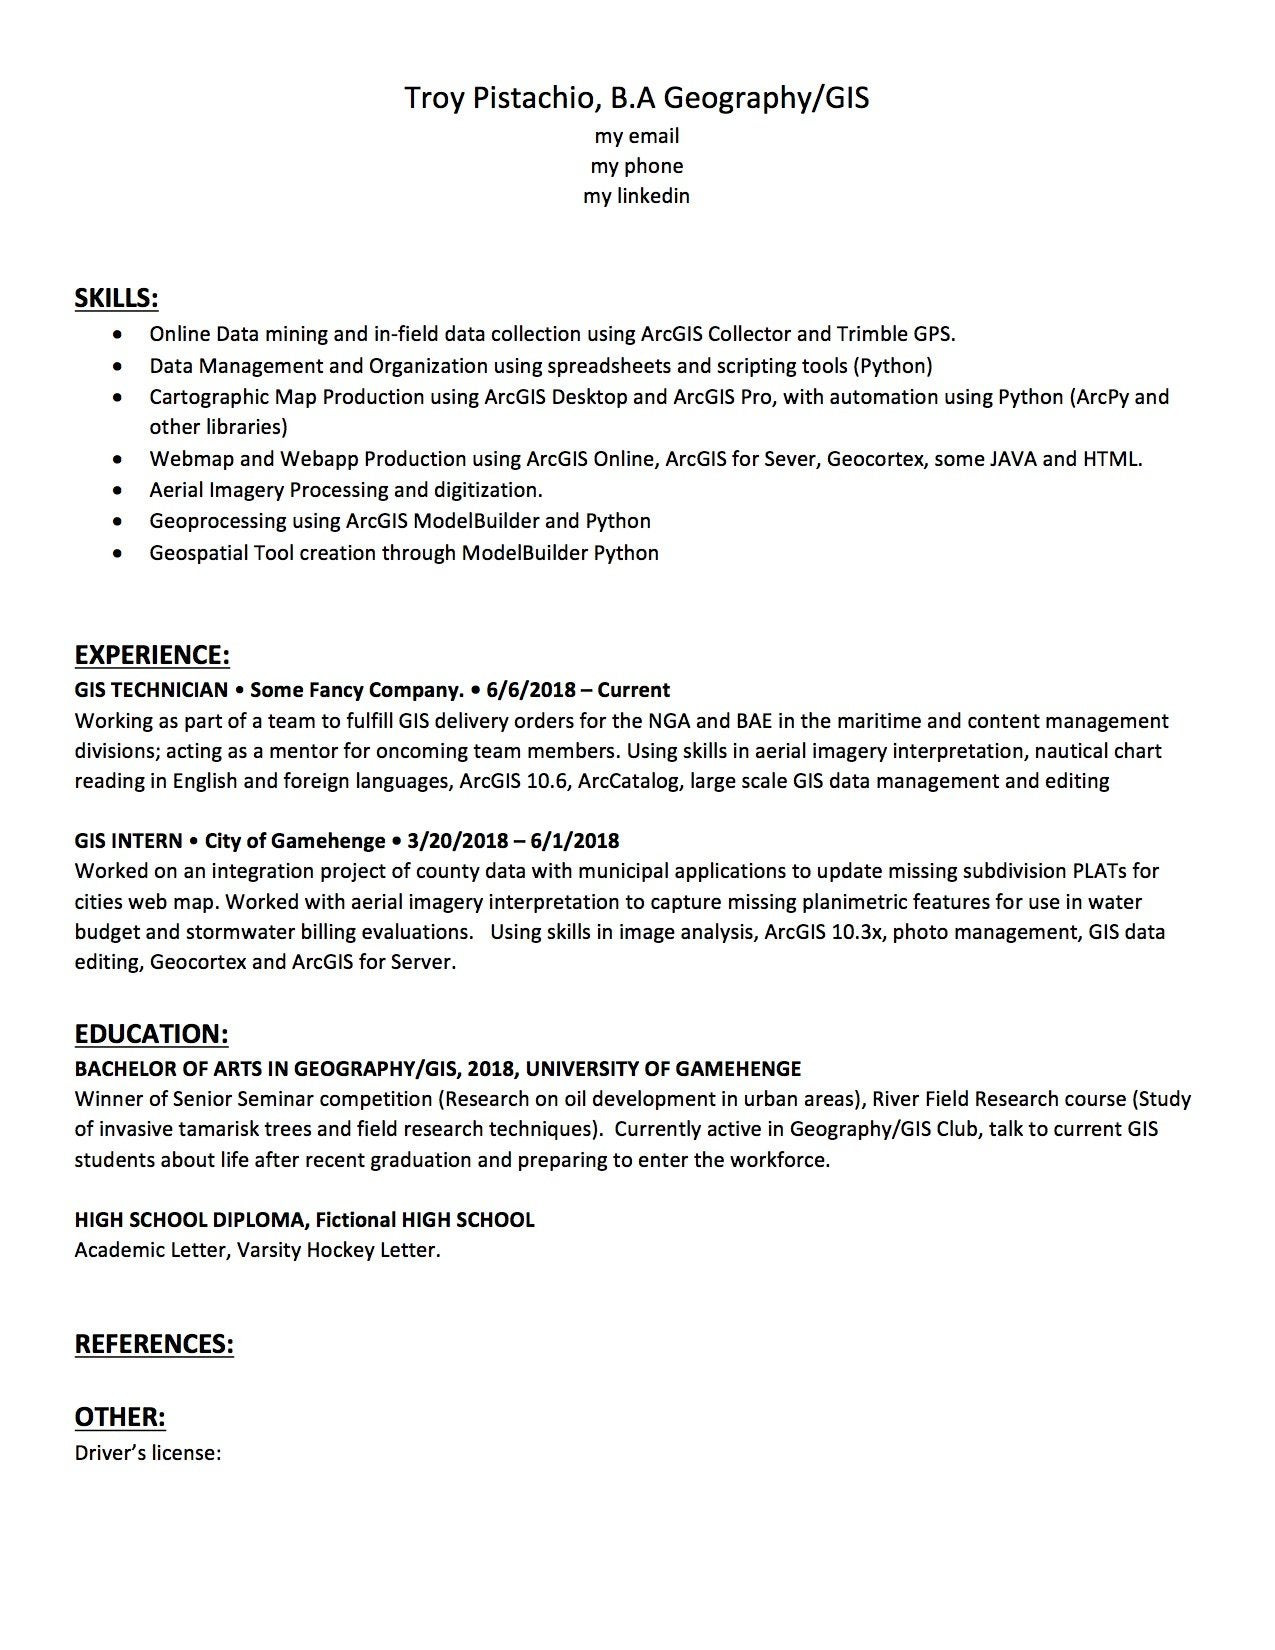 Remote Sensing and Gis Resume Sample Gis Resume and Cover Letter Critique : R/gis